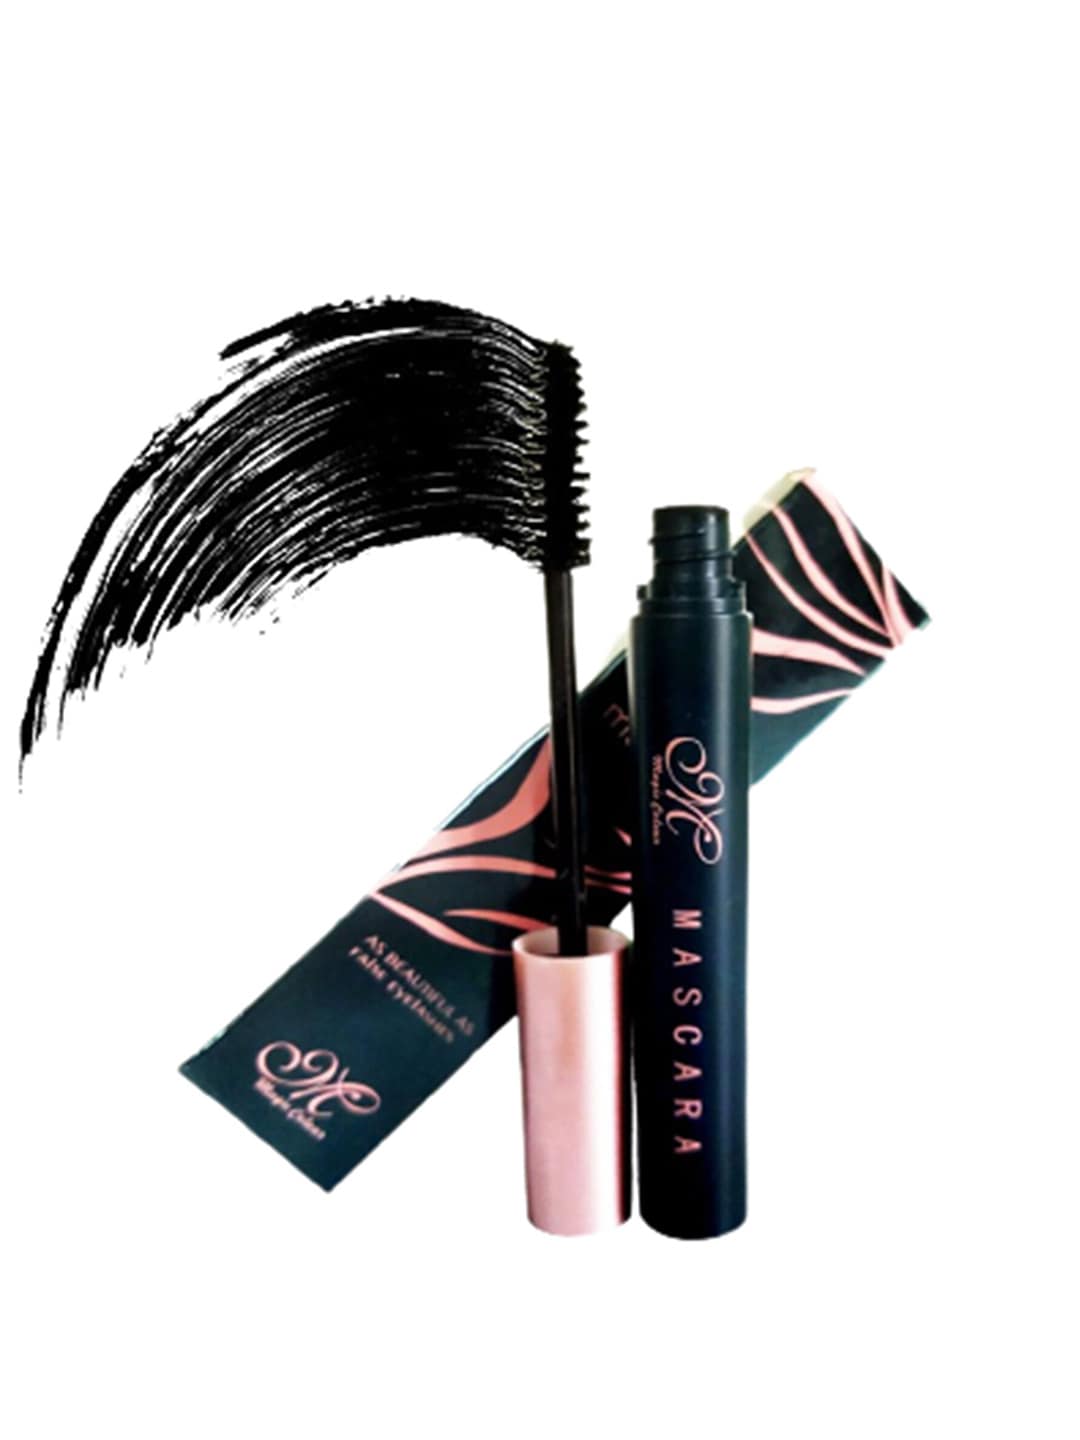 Magic Colour Dense and Charming Max Curling Mascara - Black 12 g Price in India